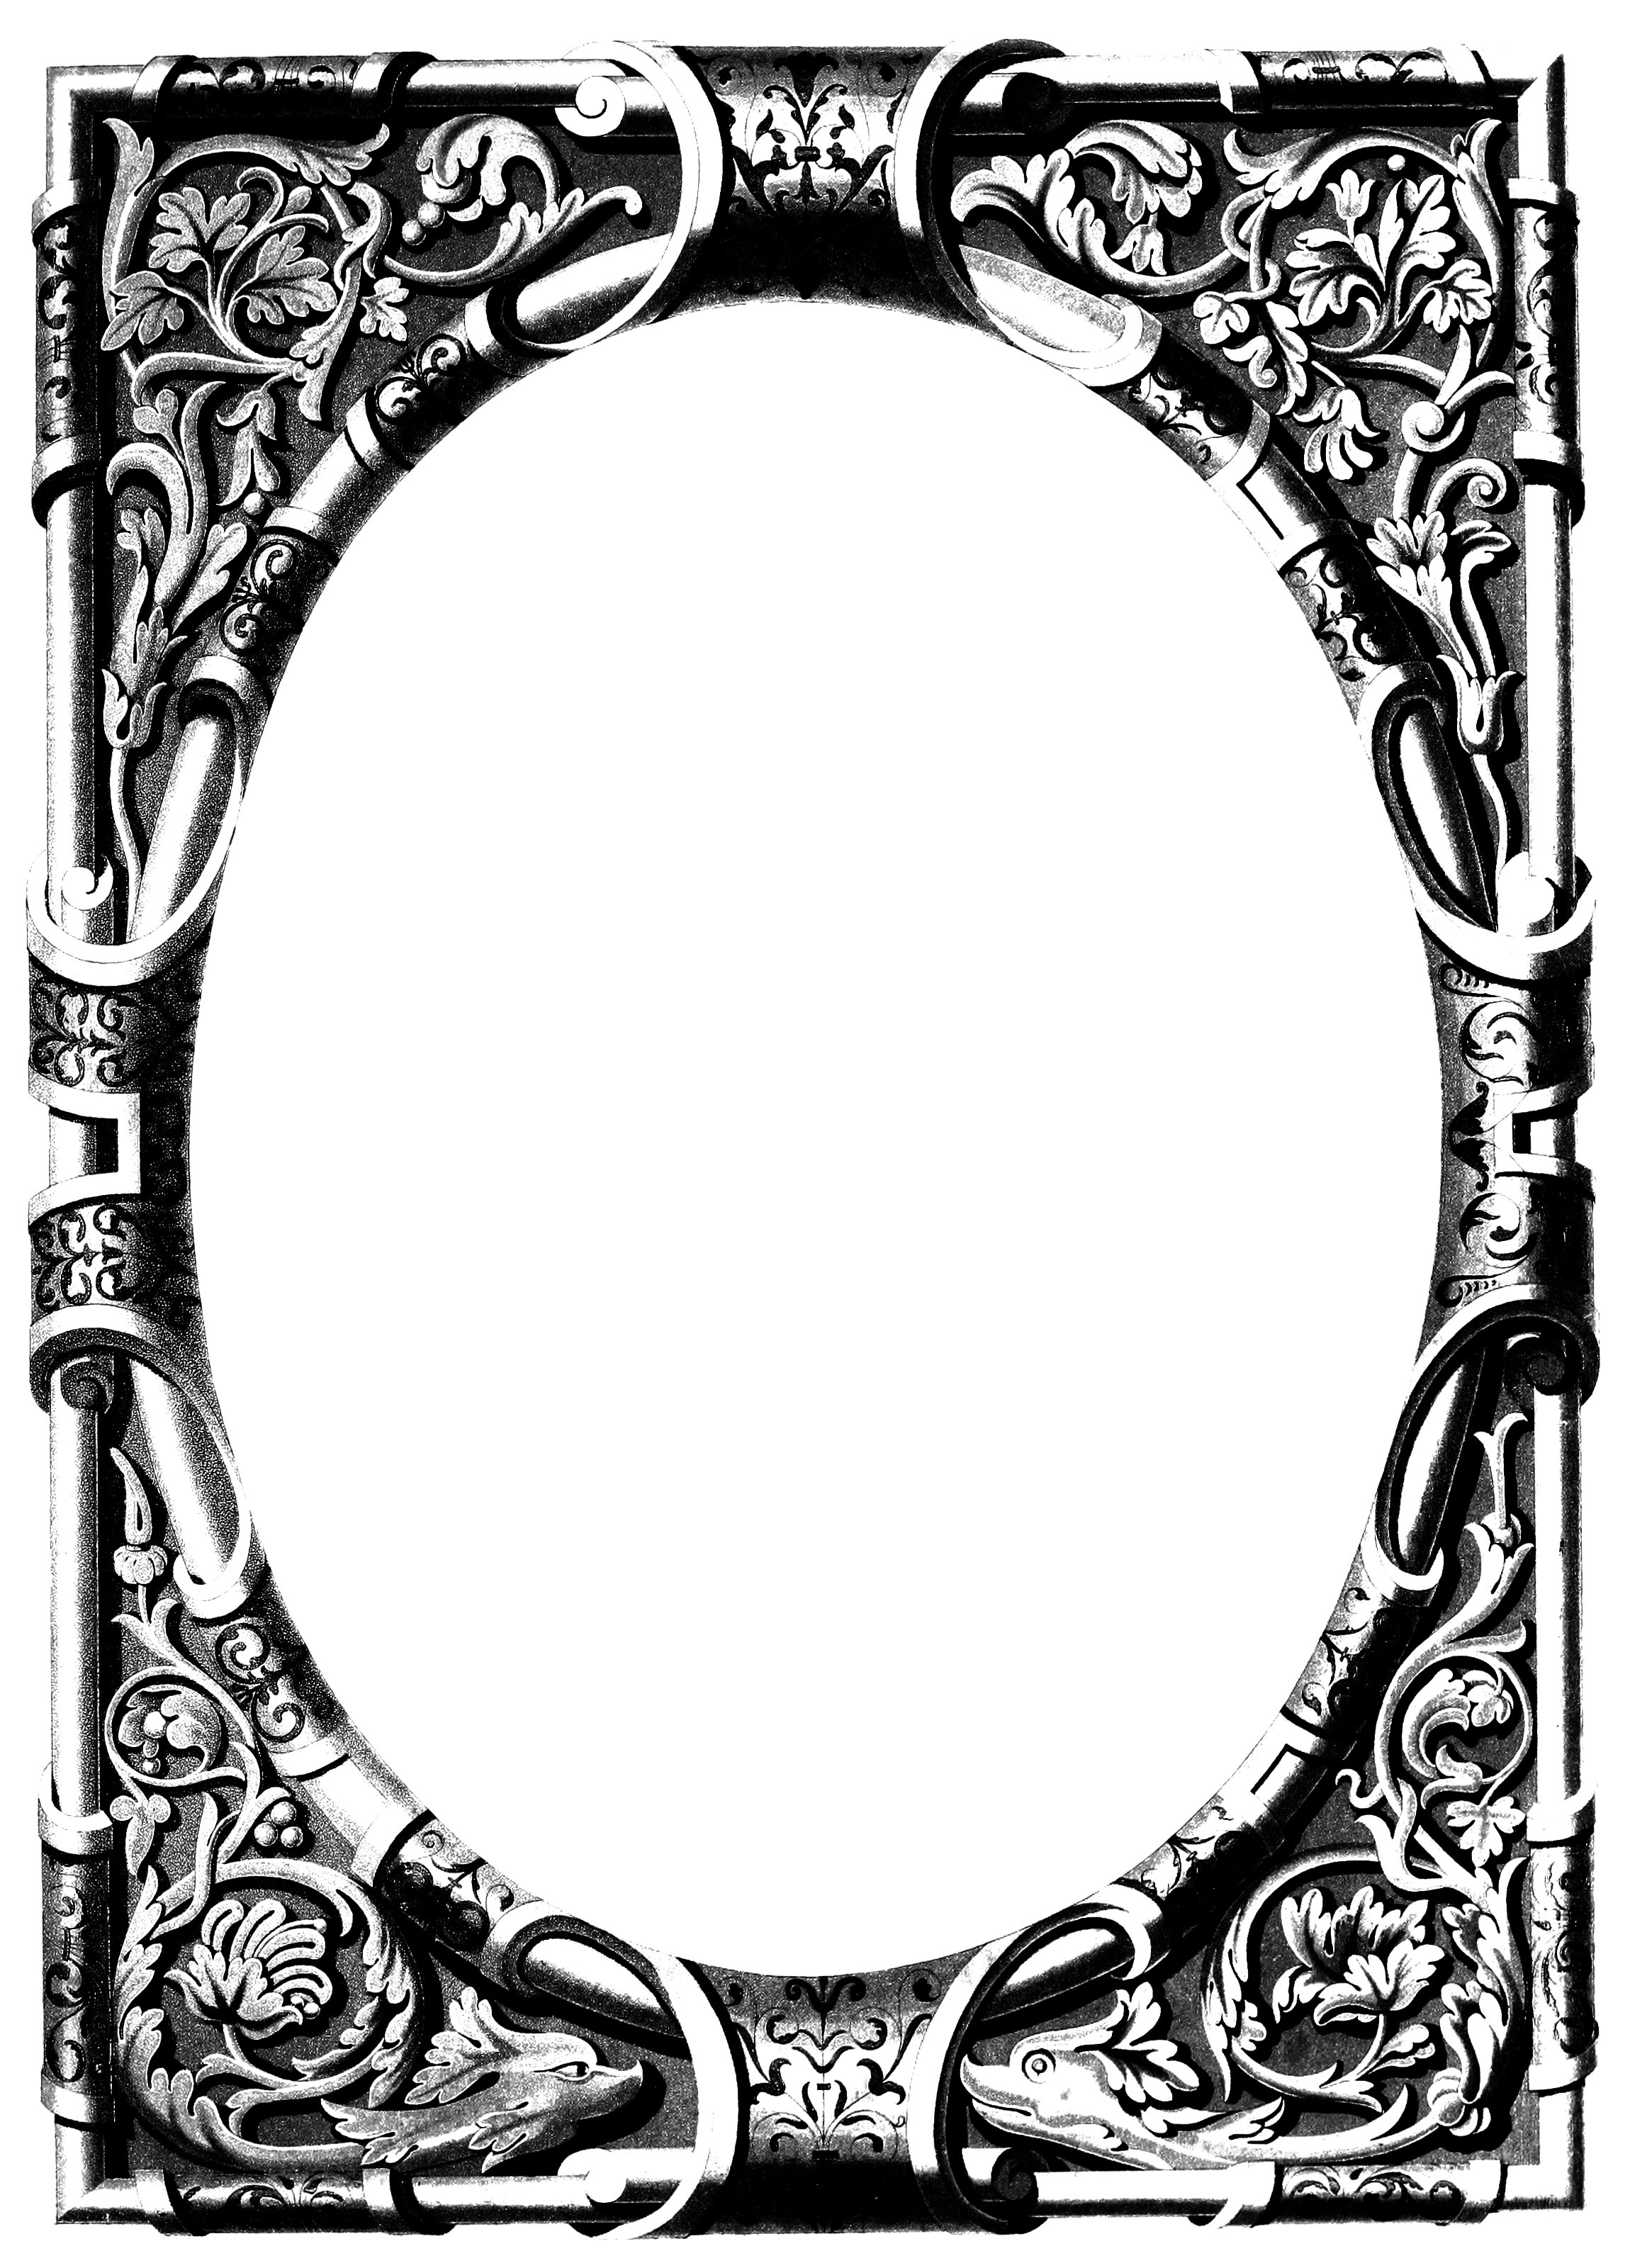 Related Pictures Ornate Border Clip Art Car Pictures